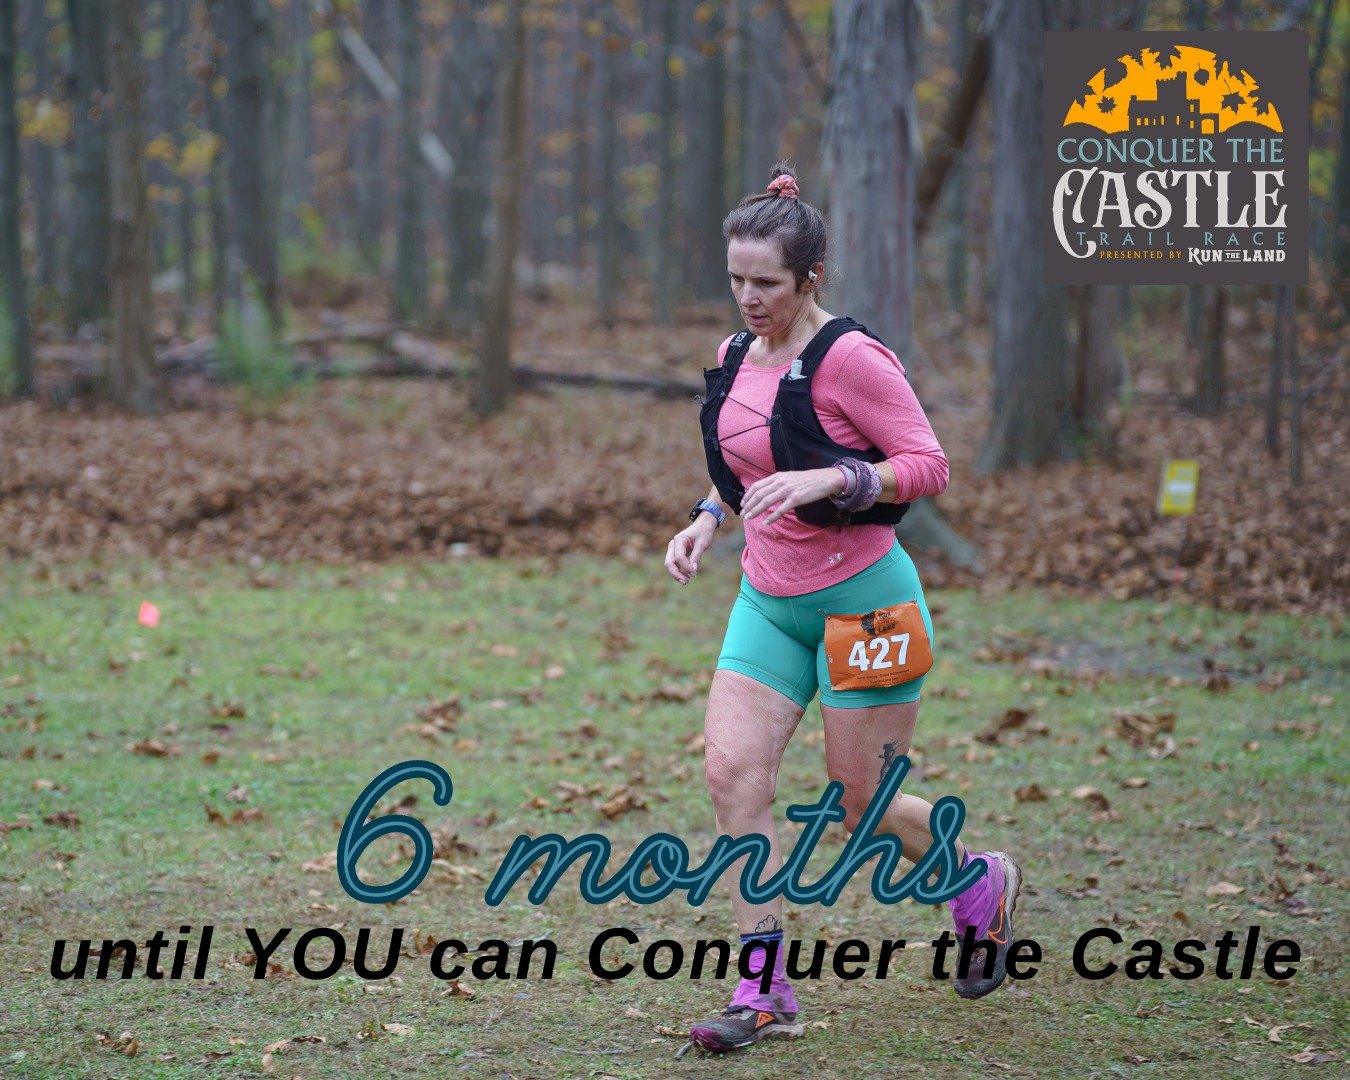 It's hard to believe that Conquer the Castle is just 6 months away!

While that may seem like a long time away, it will be here before you know it!

It's never too early to start training for your race goal on Saturday, November 2 at North Chagrin Re